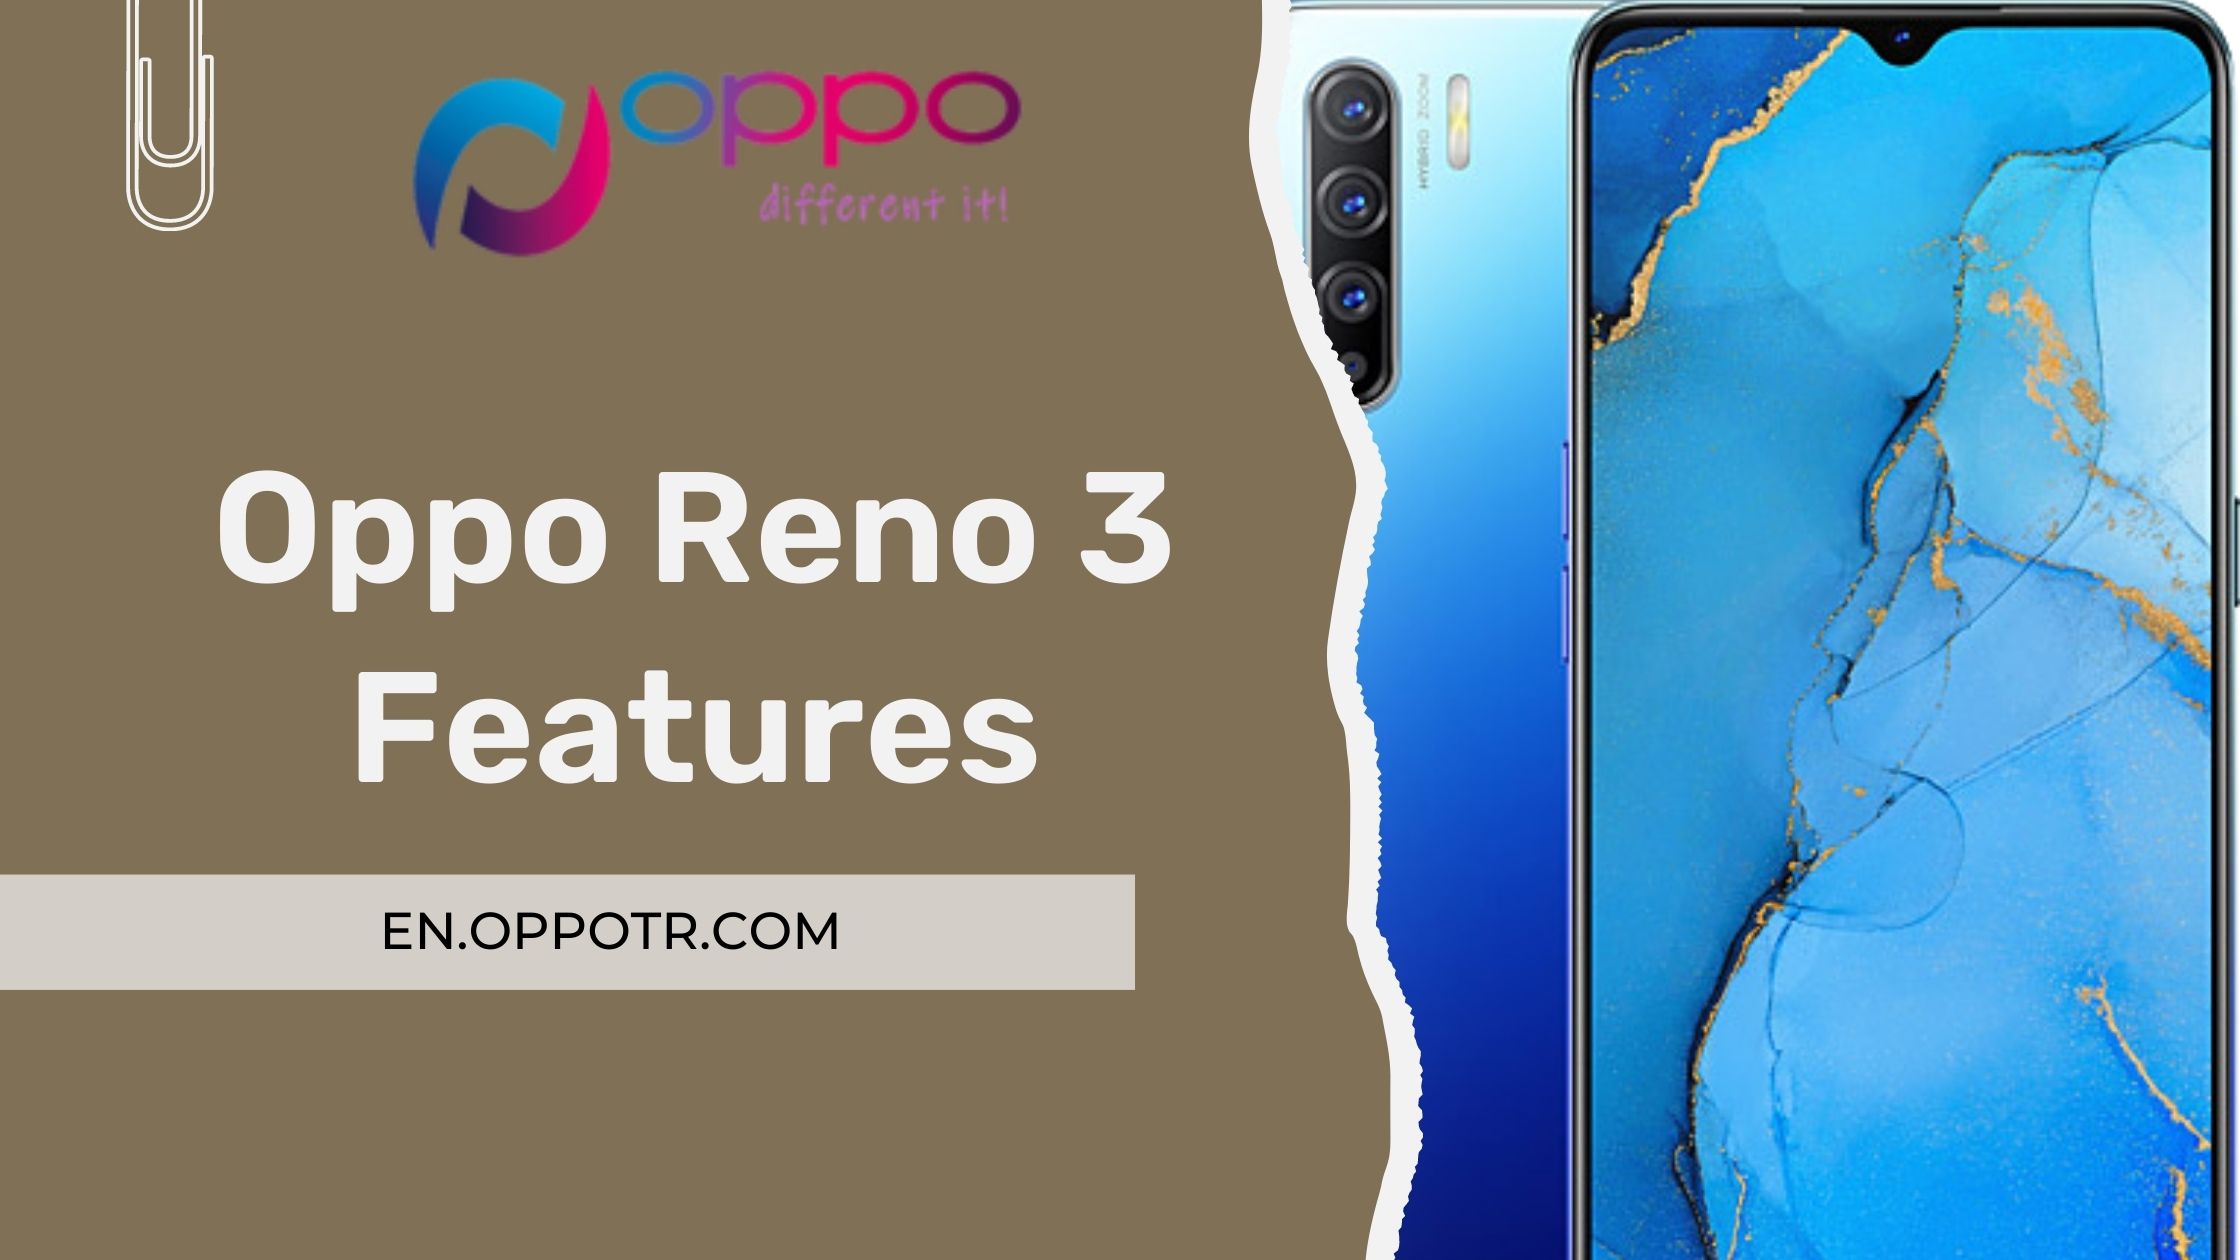 Oppo Reno 3 Features: A Comprehensive Look at the Phone's Features and Specifications